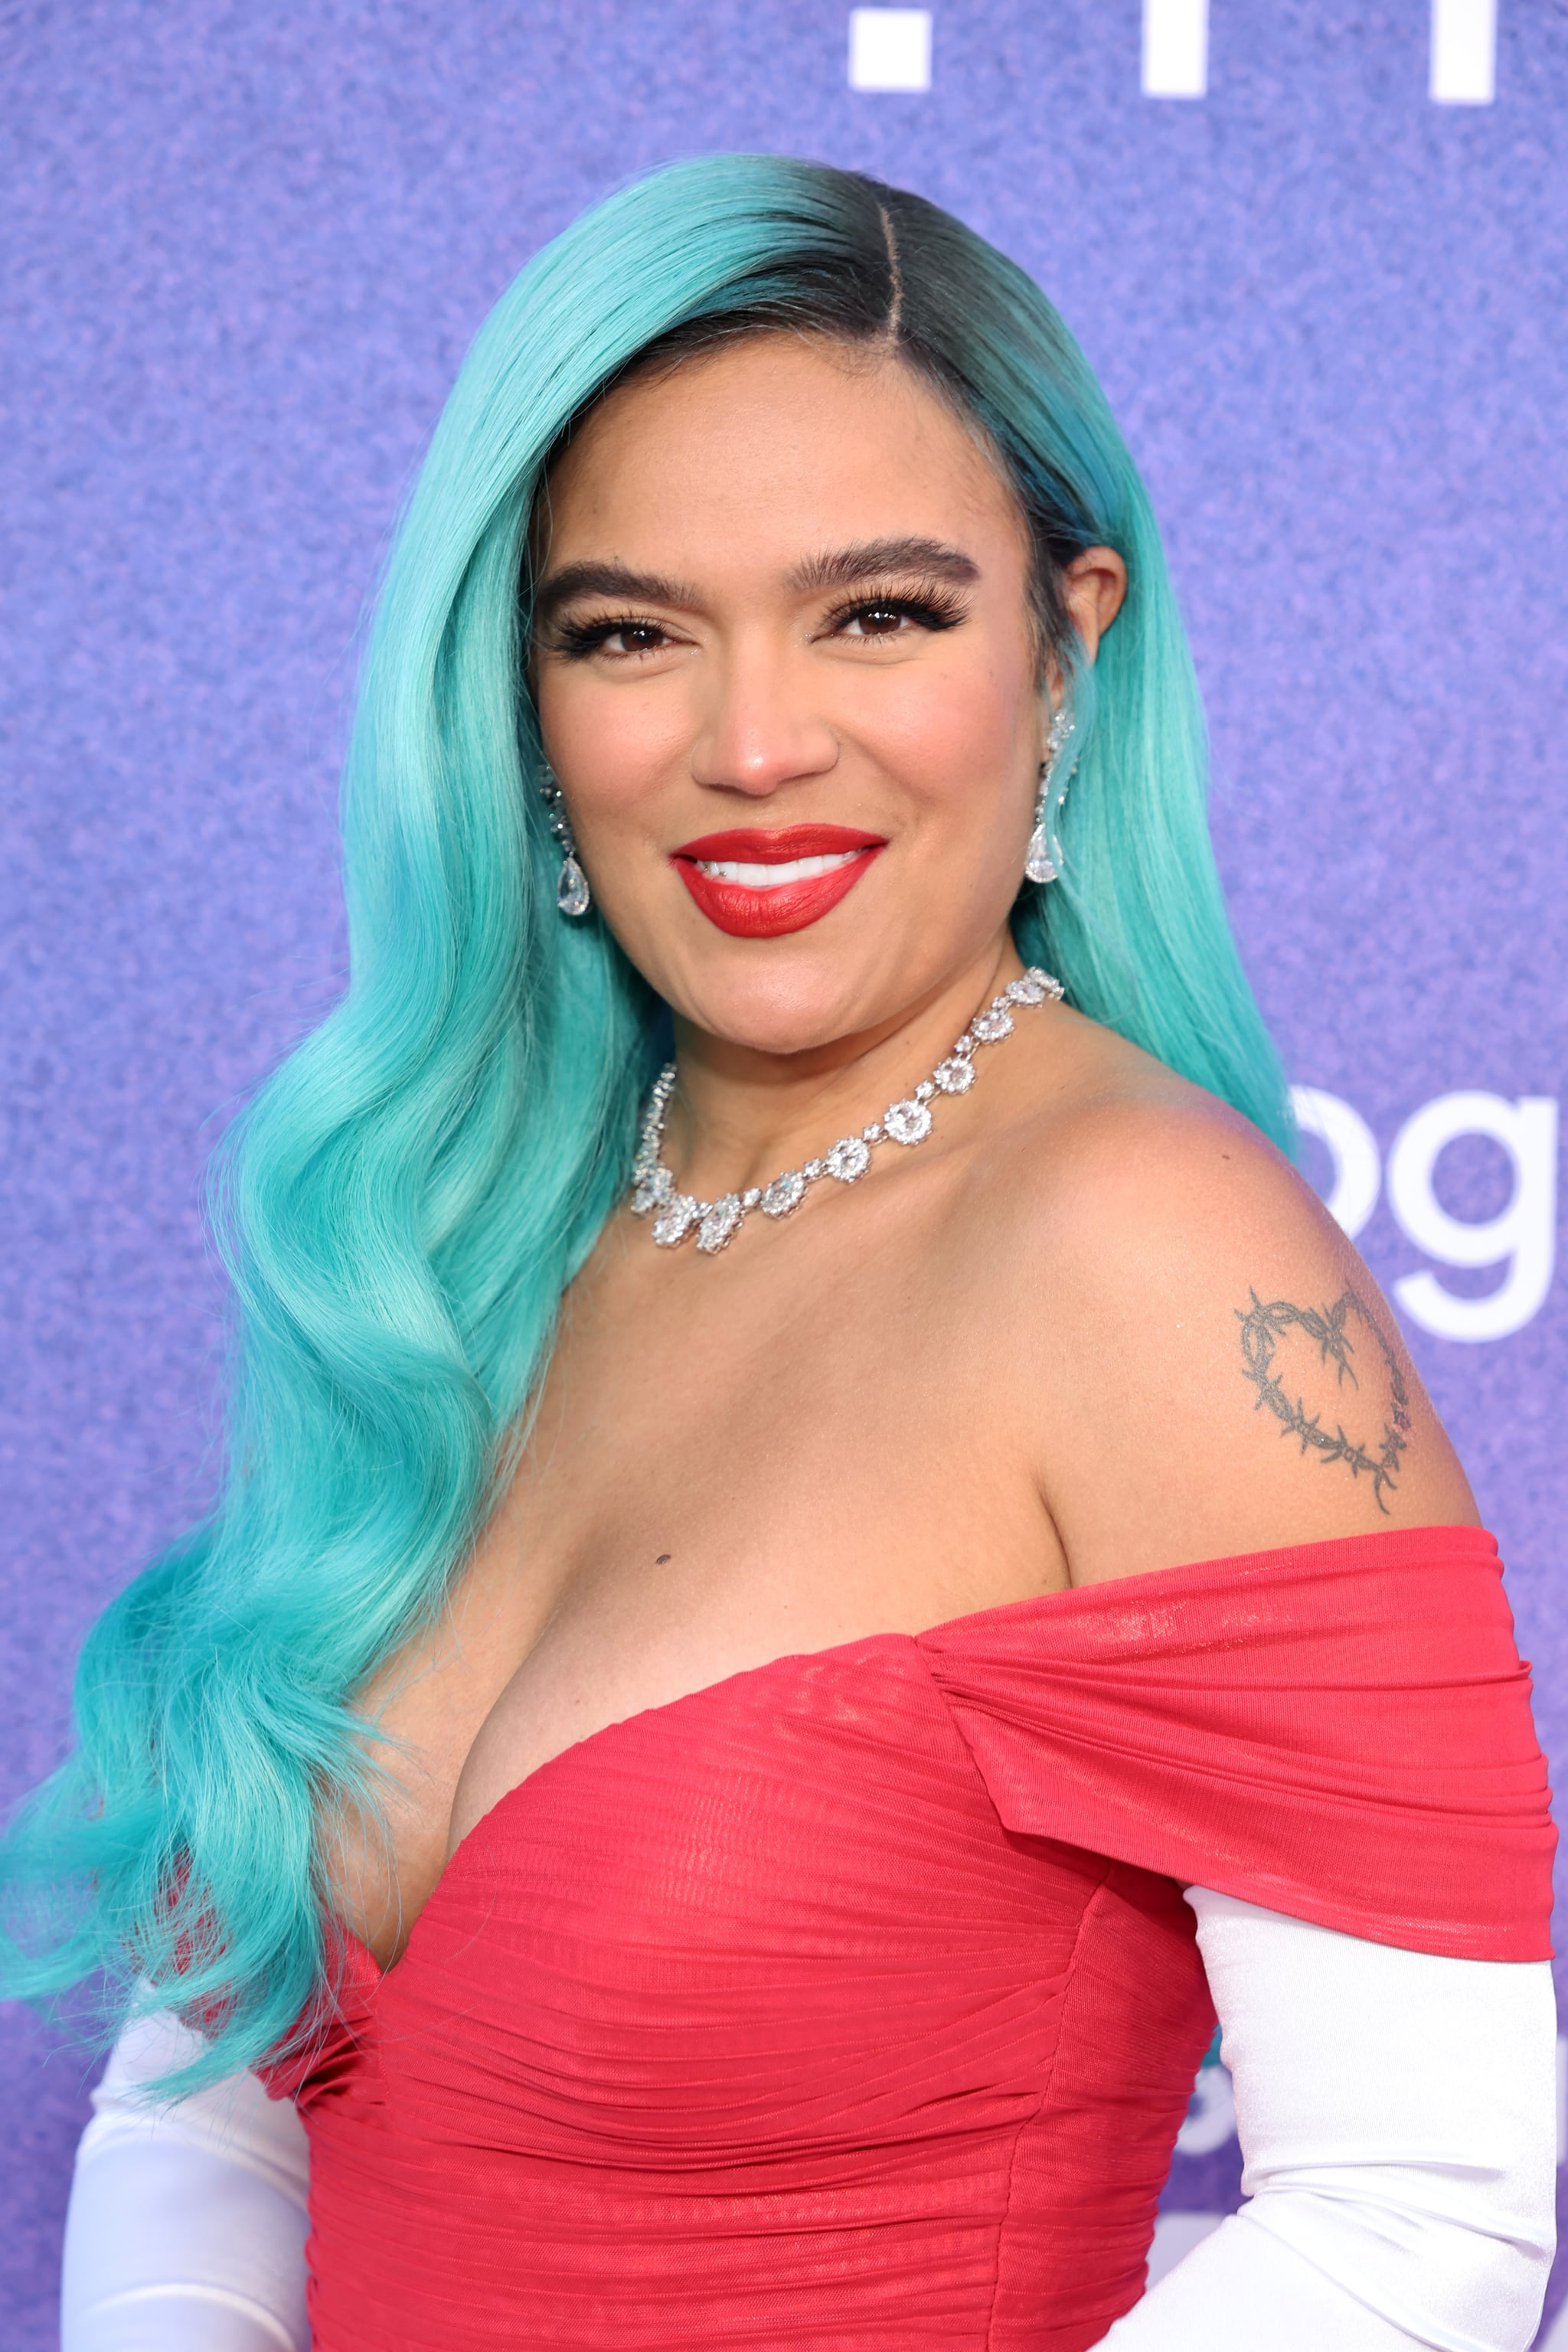 INGLEWOOD, CALIFORNIA - MARCH 02: Karol G attends Billboard Women in Music at YouTube Theater on March 02, 2022 in Inglewood, California. (Photo by Amy Sussman/FilmMagic)